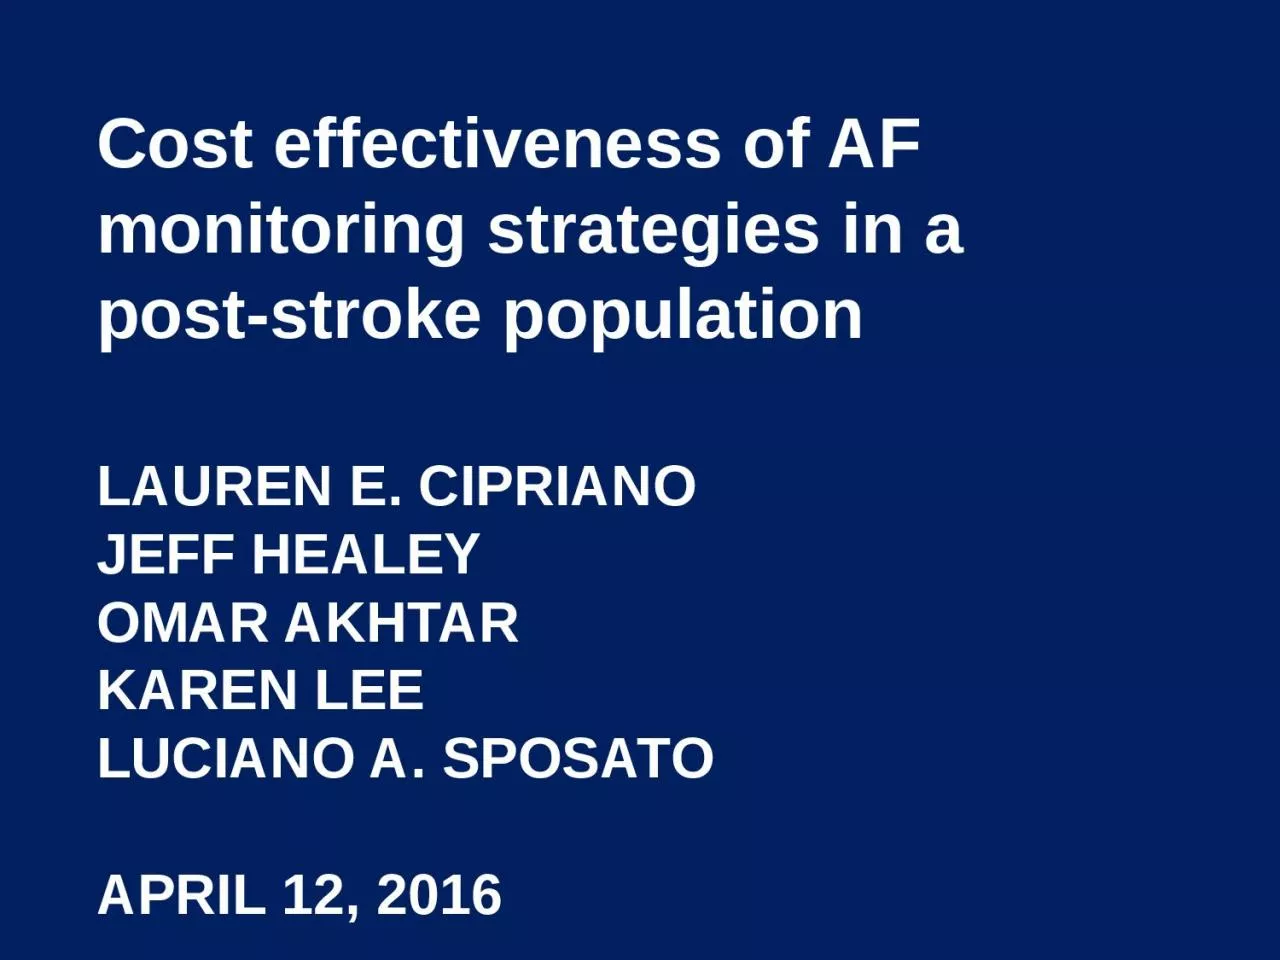 Cost effectiveness of AF monitoring strategies in a